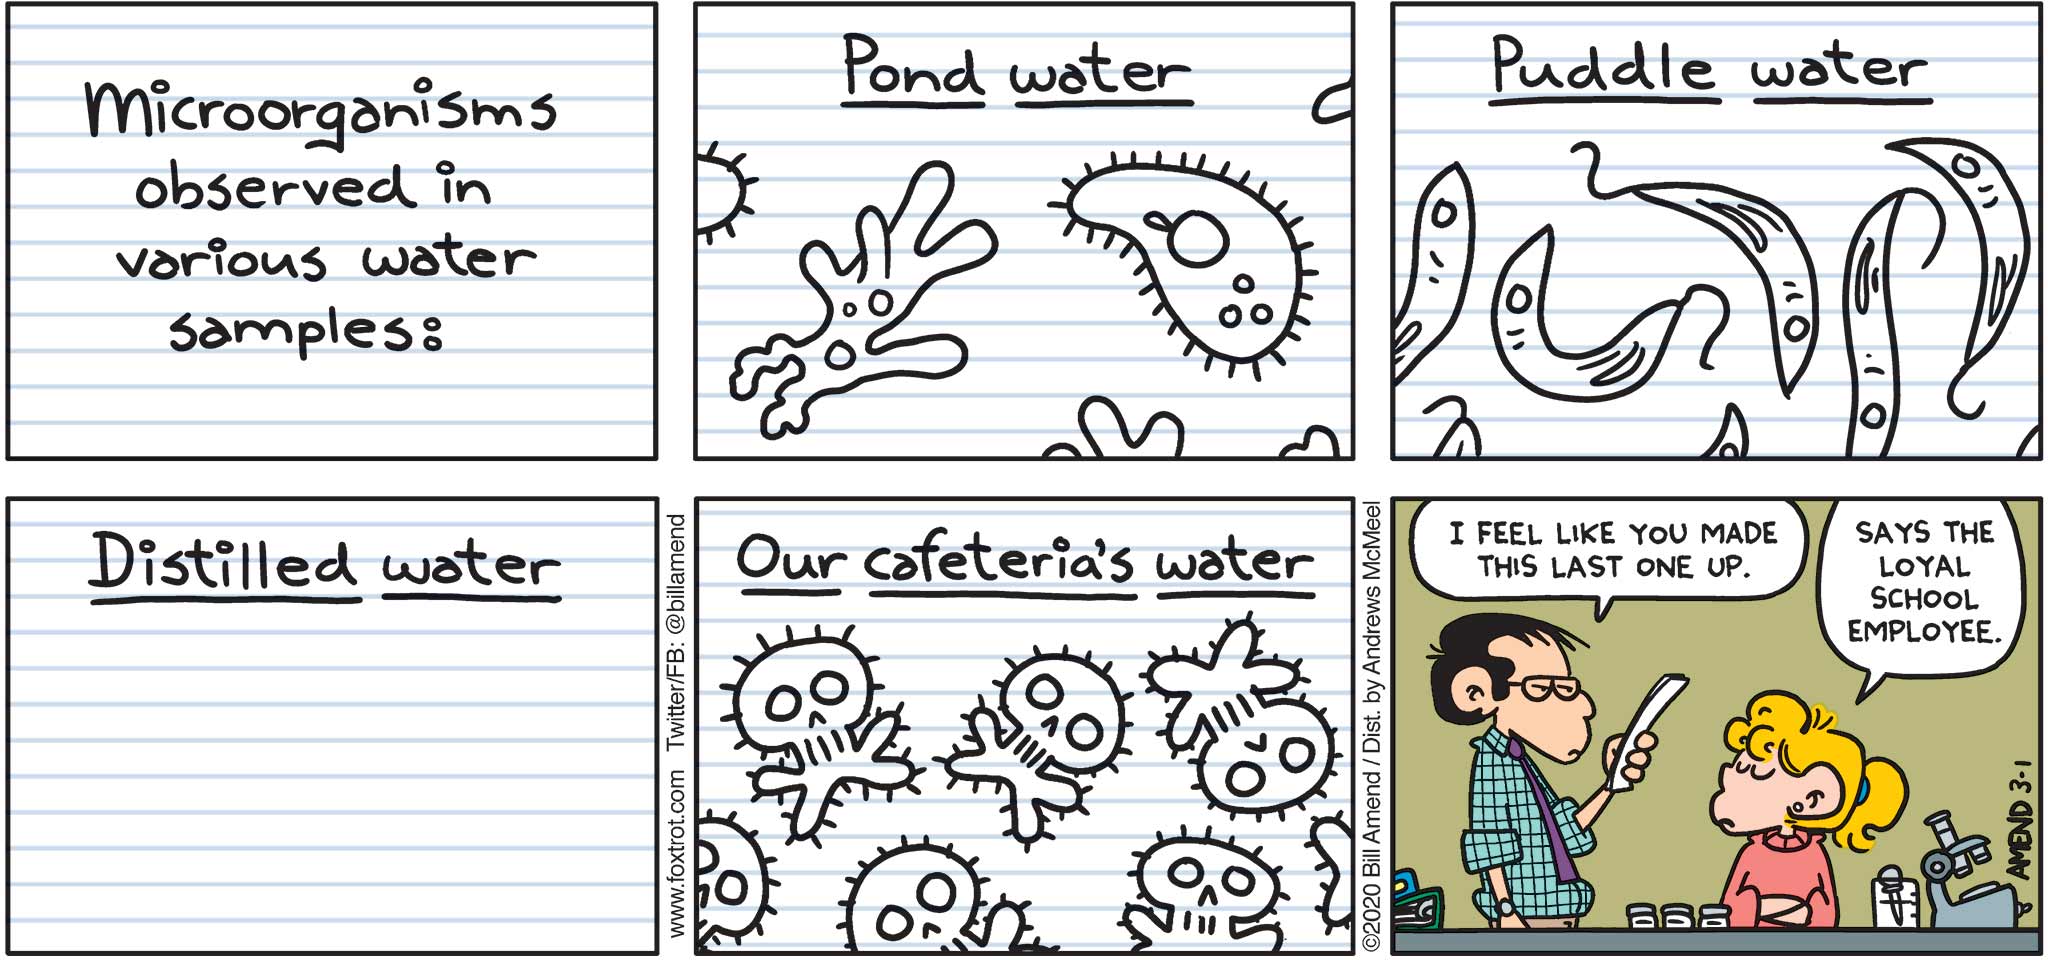 FoxTrot by Bill Amend - "Cell Phony" published March 1, 2020 - Microorganisms observed in various water samples: Pond Water, Puddle Water, Distilled Water, Our Cafeteria's Water. Teacher: I feel like you made this last one up. Paige: Says the loyal school employee.